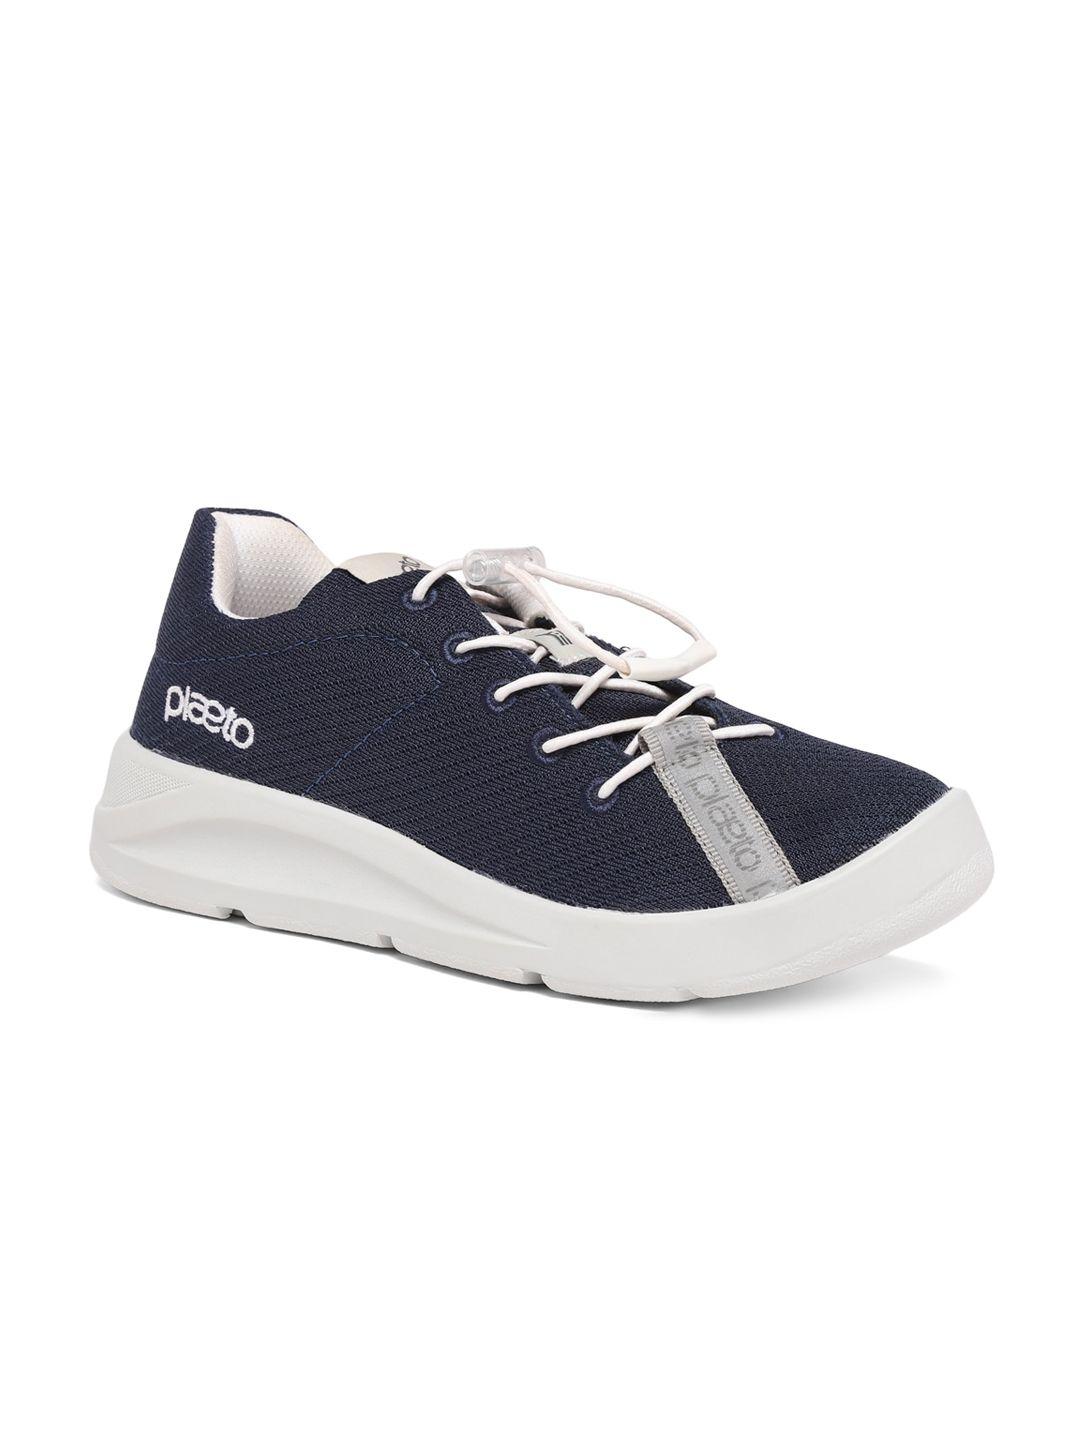 plaeto kids comfortable lightweight sneakers